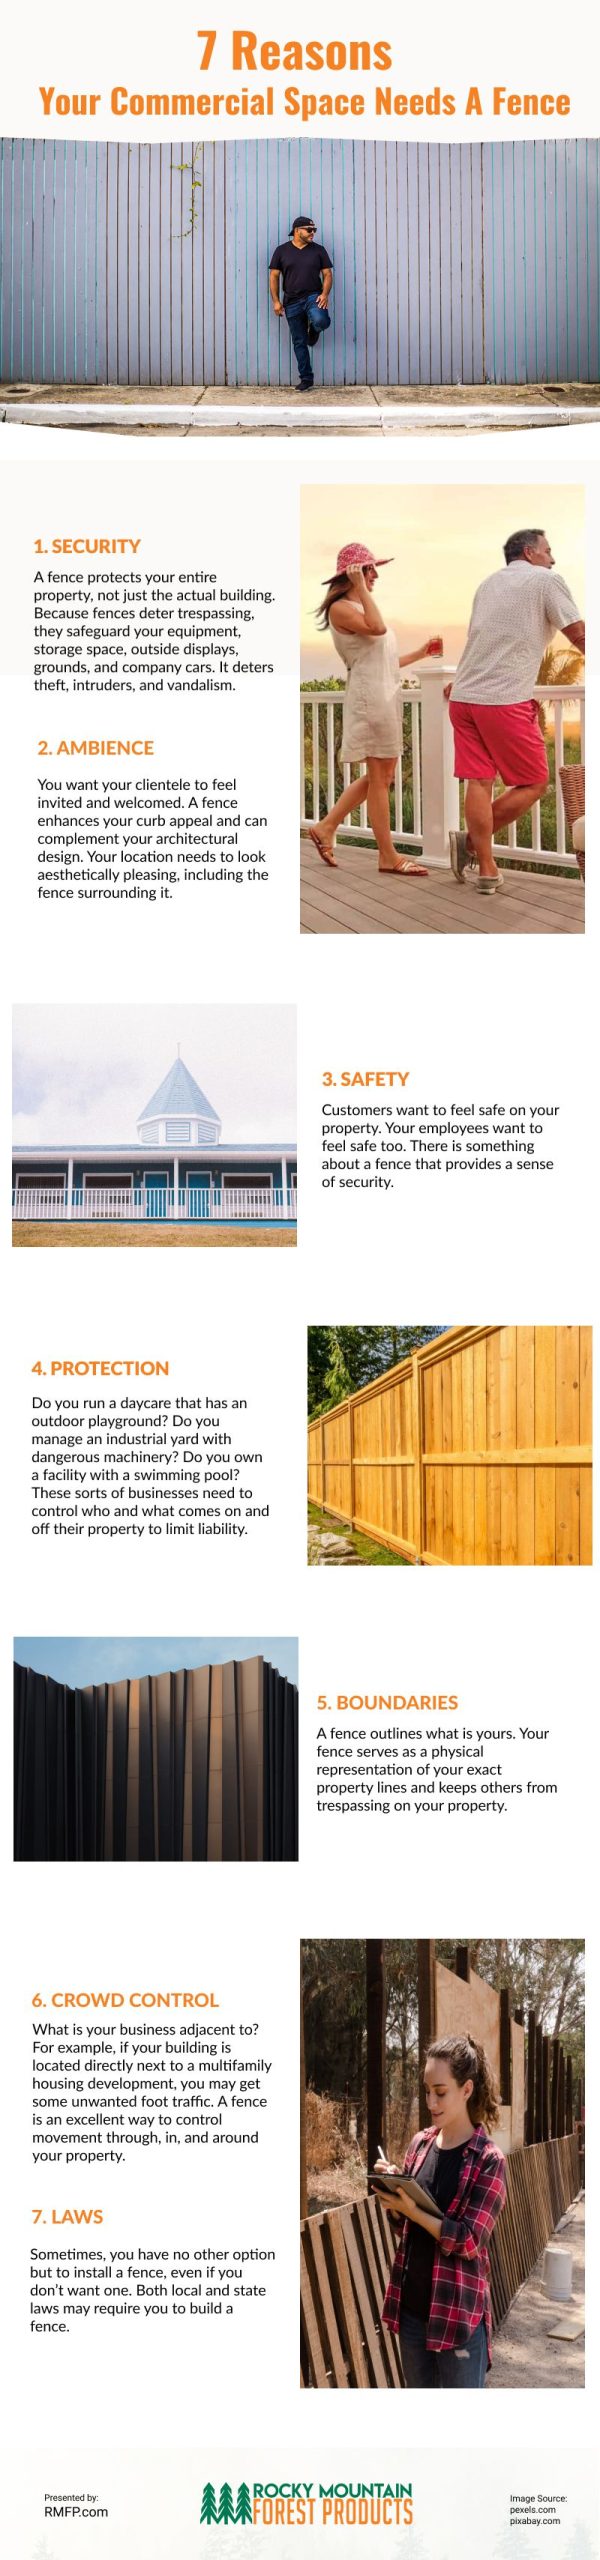 7 Reasons Your Commercial Space Needs A Fence Infographic